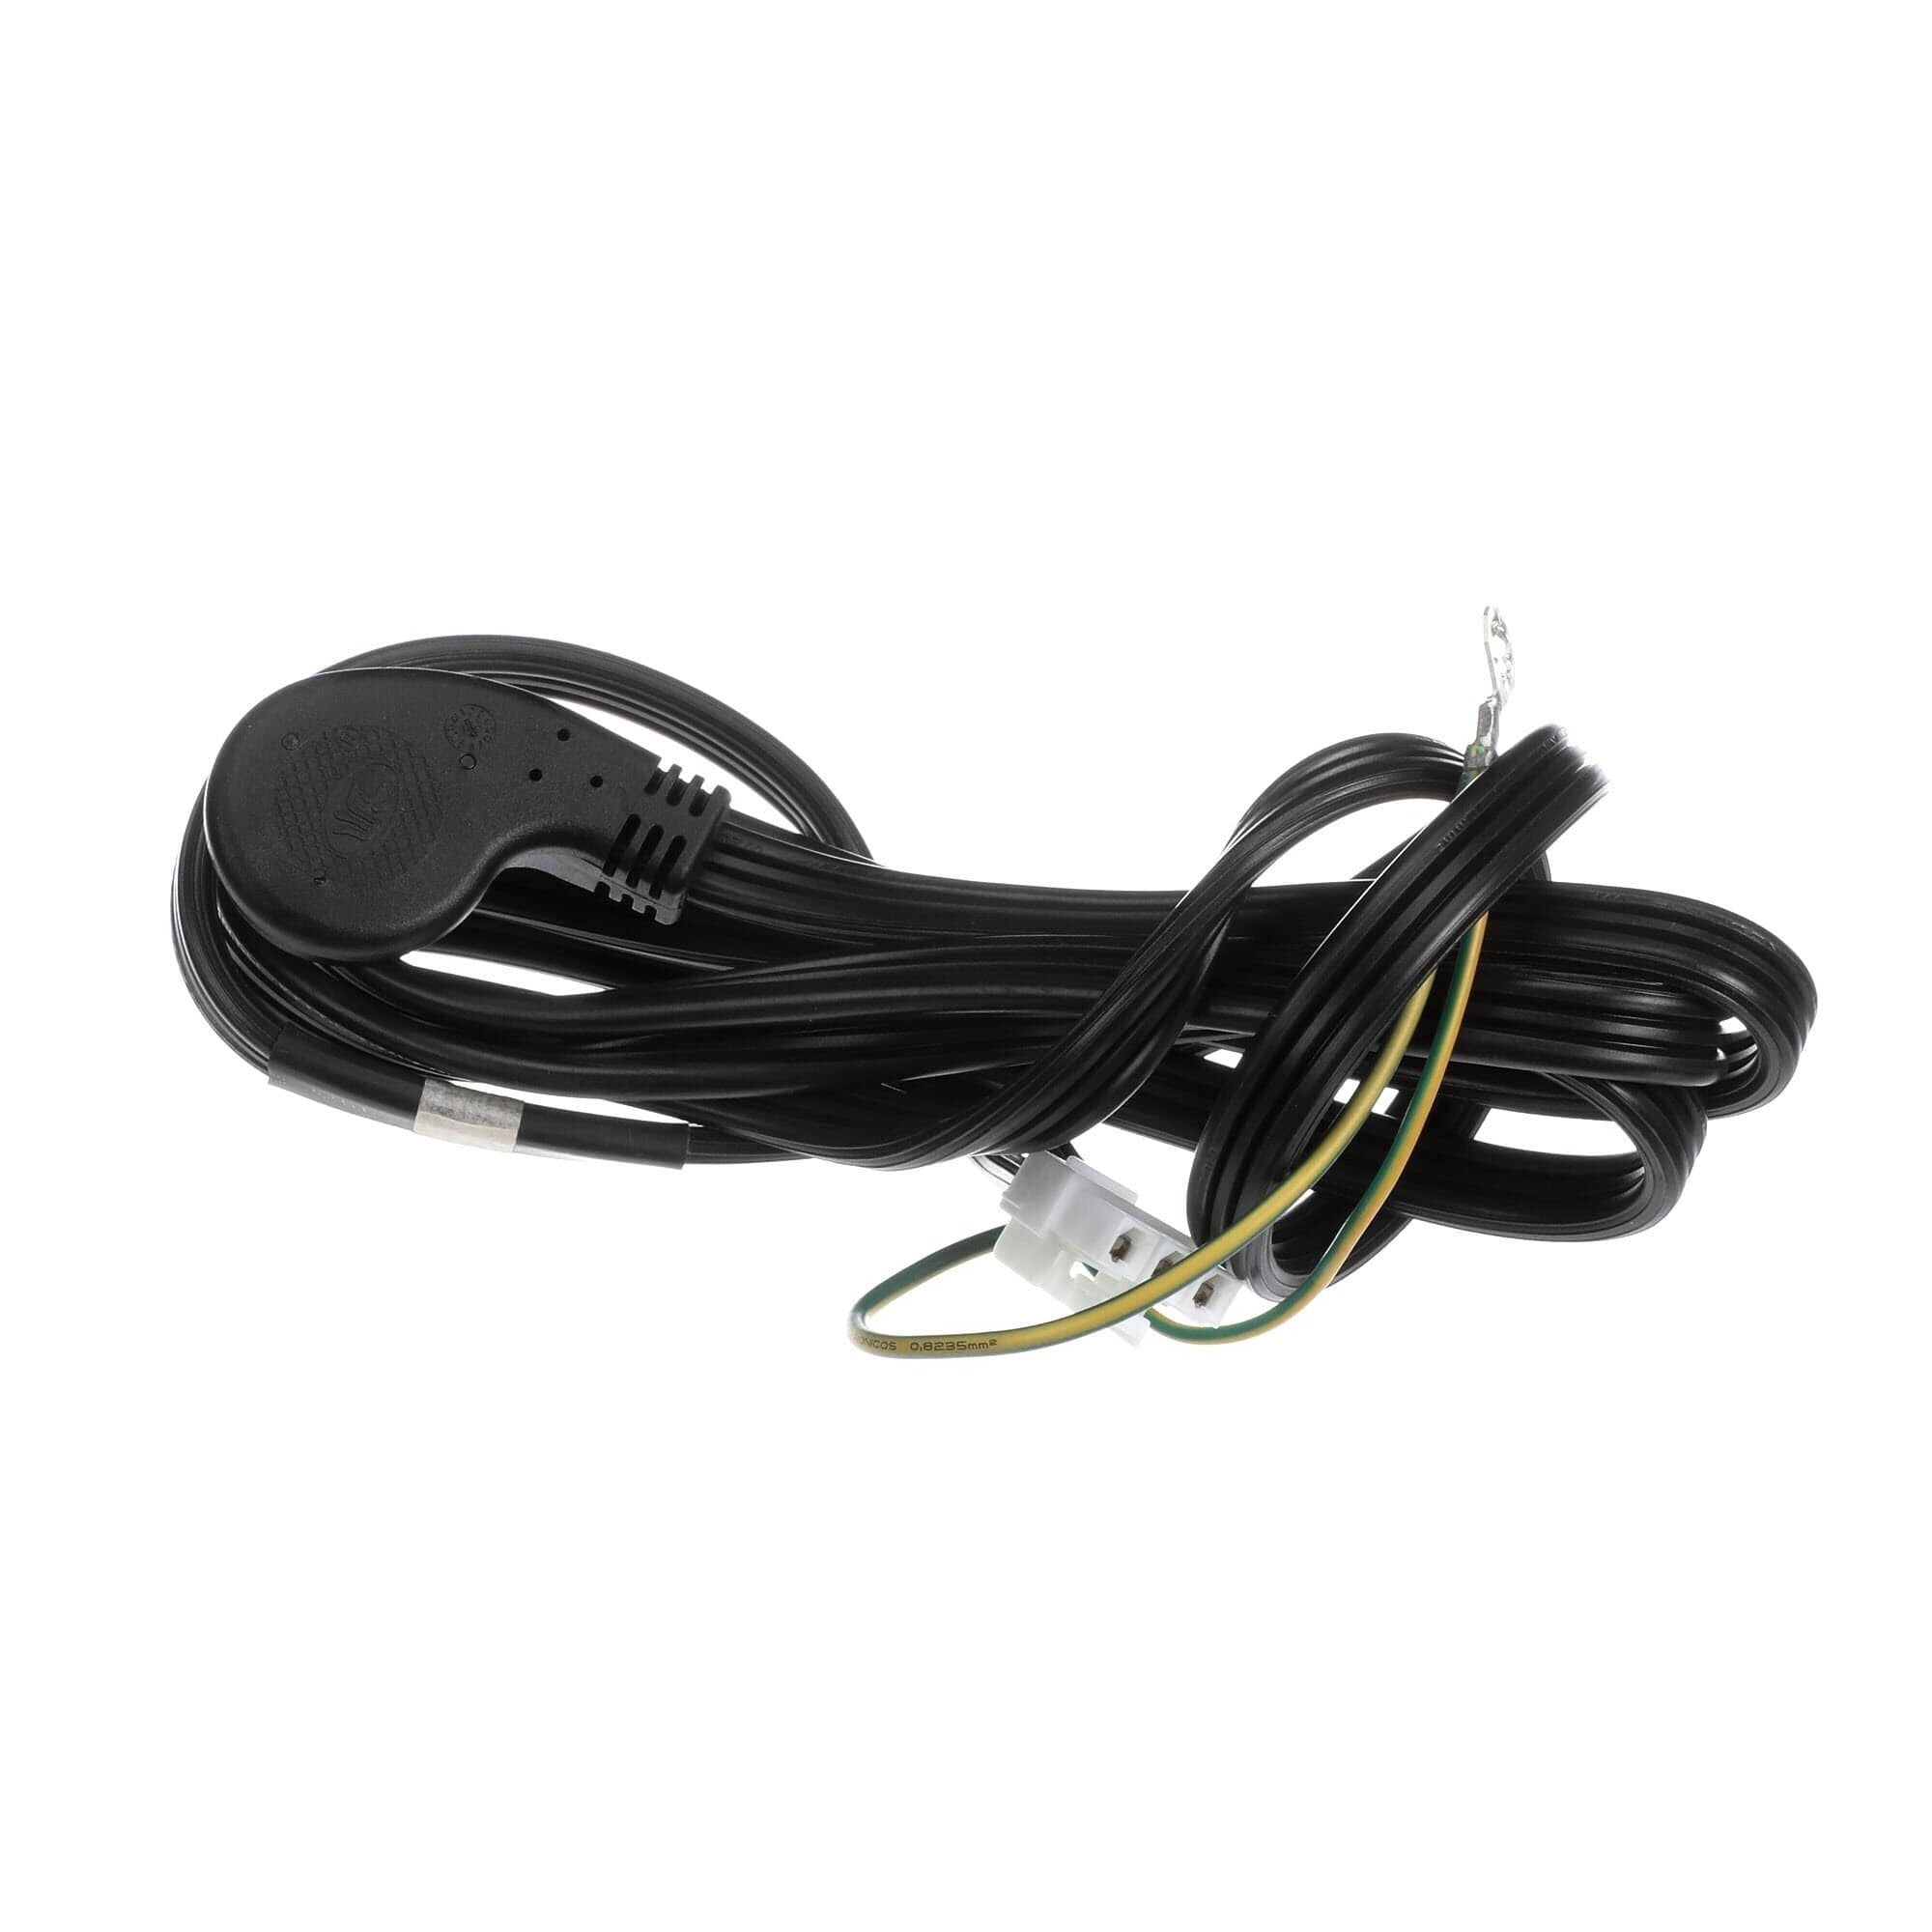 241516904 - Electrolux Refrigerator Power Cord New